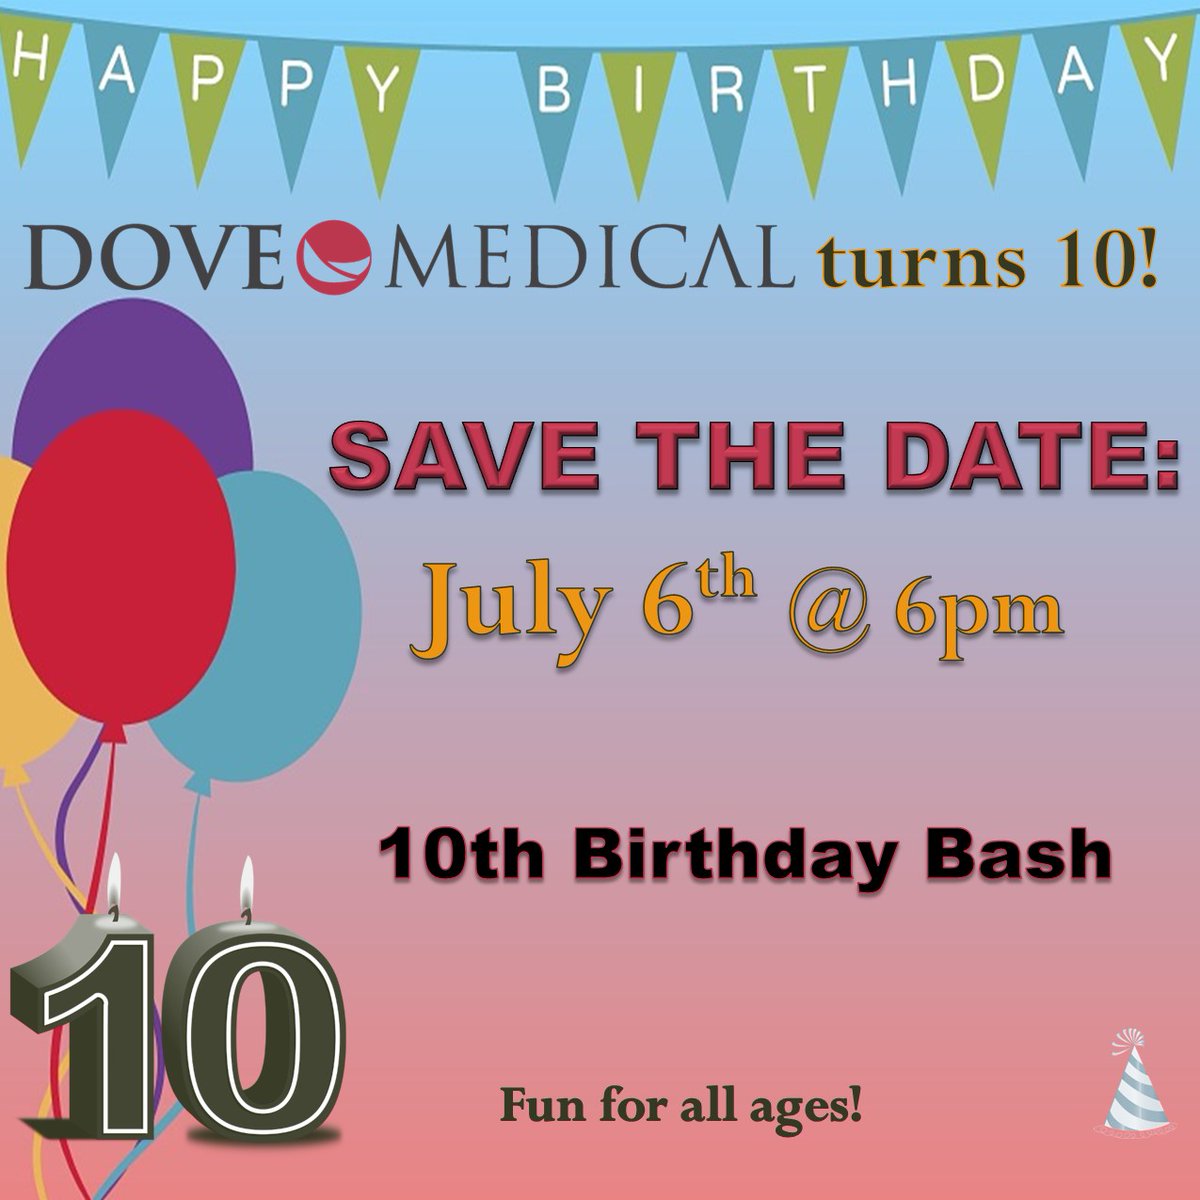 Celebrate Dove Medical's 10th birthday. Join the party on July 6. Bring the family. #BirthdayBash #10thbirthday #pregnancydiagnosisclinic